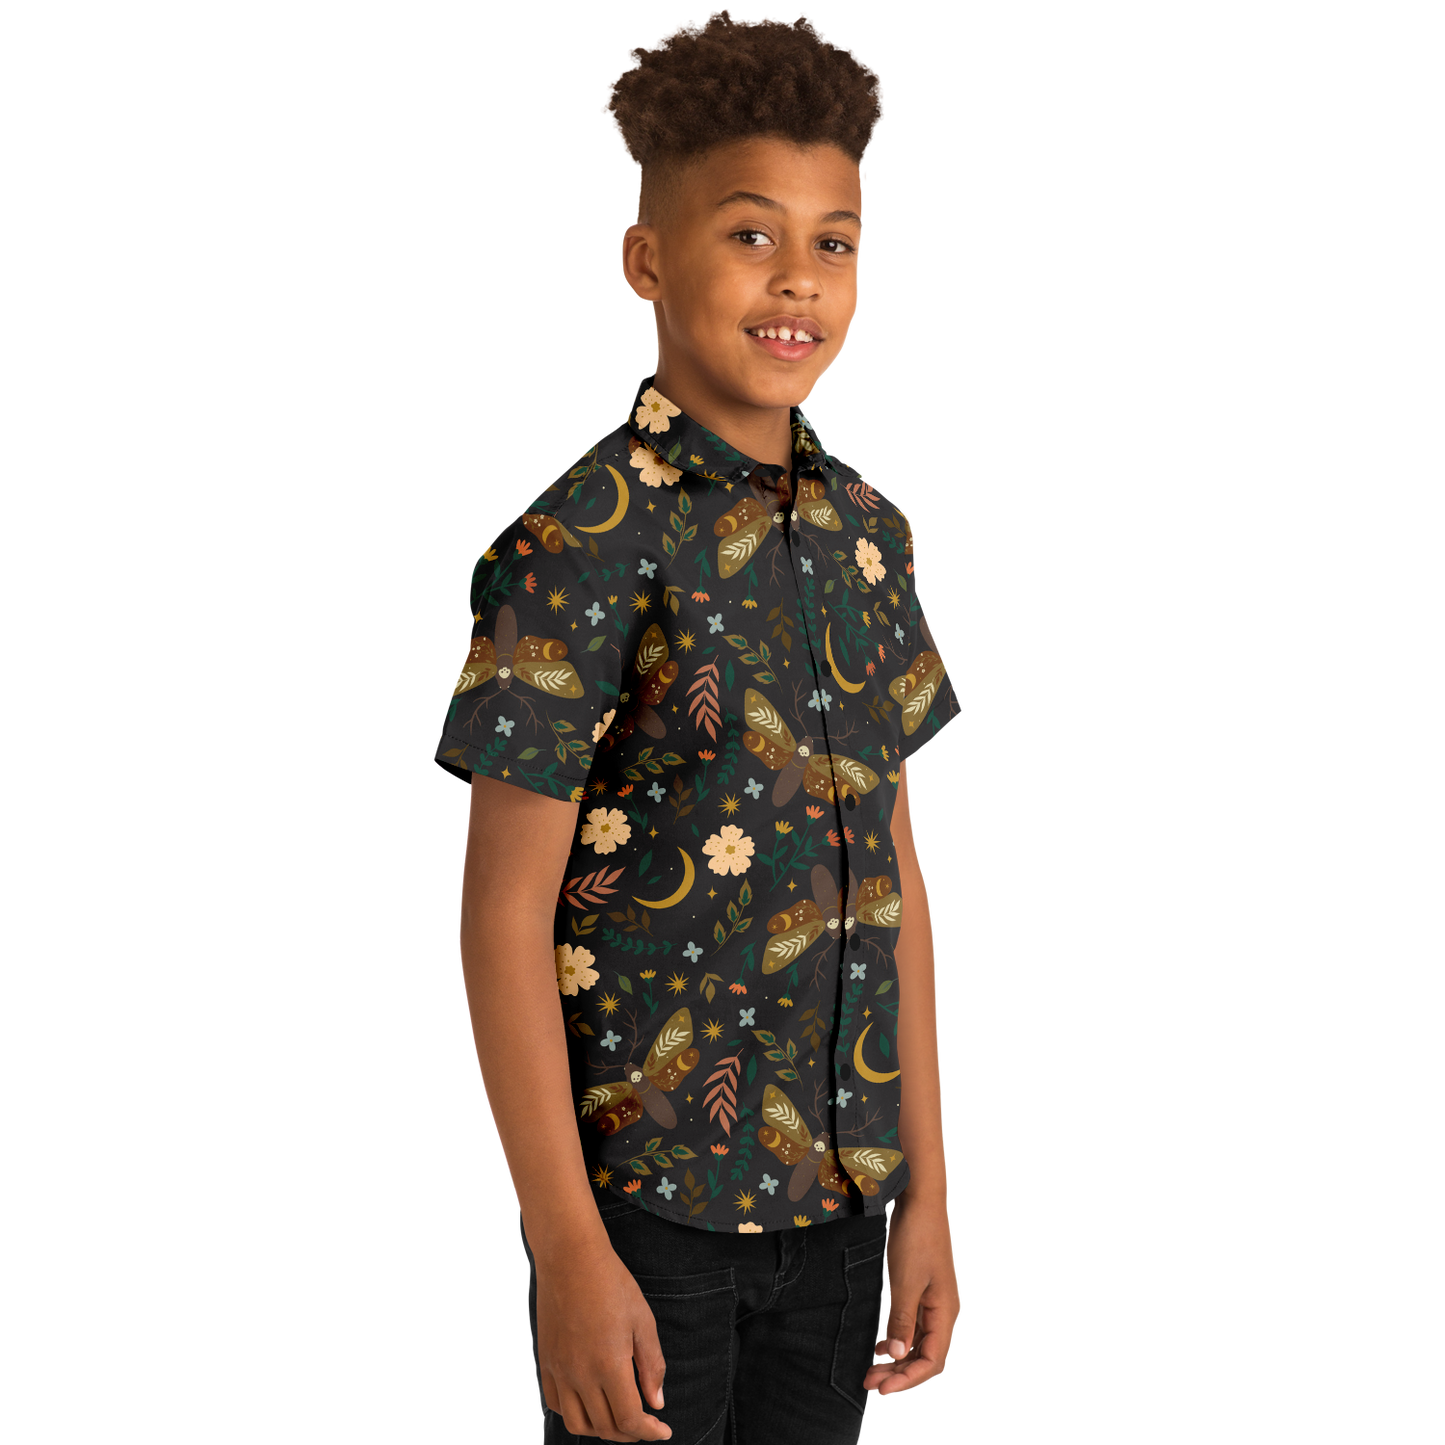 Cottage-core moths and flowers Youth Button-up Shirt